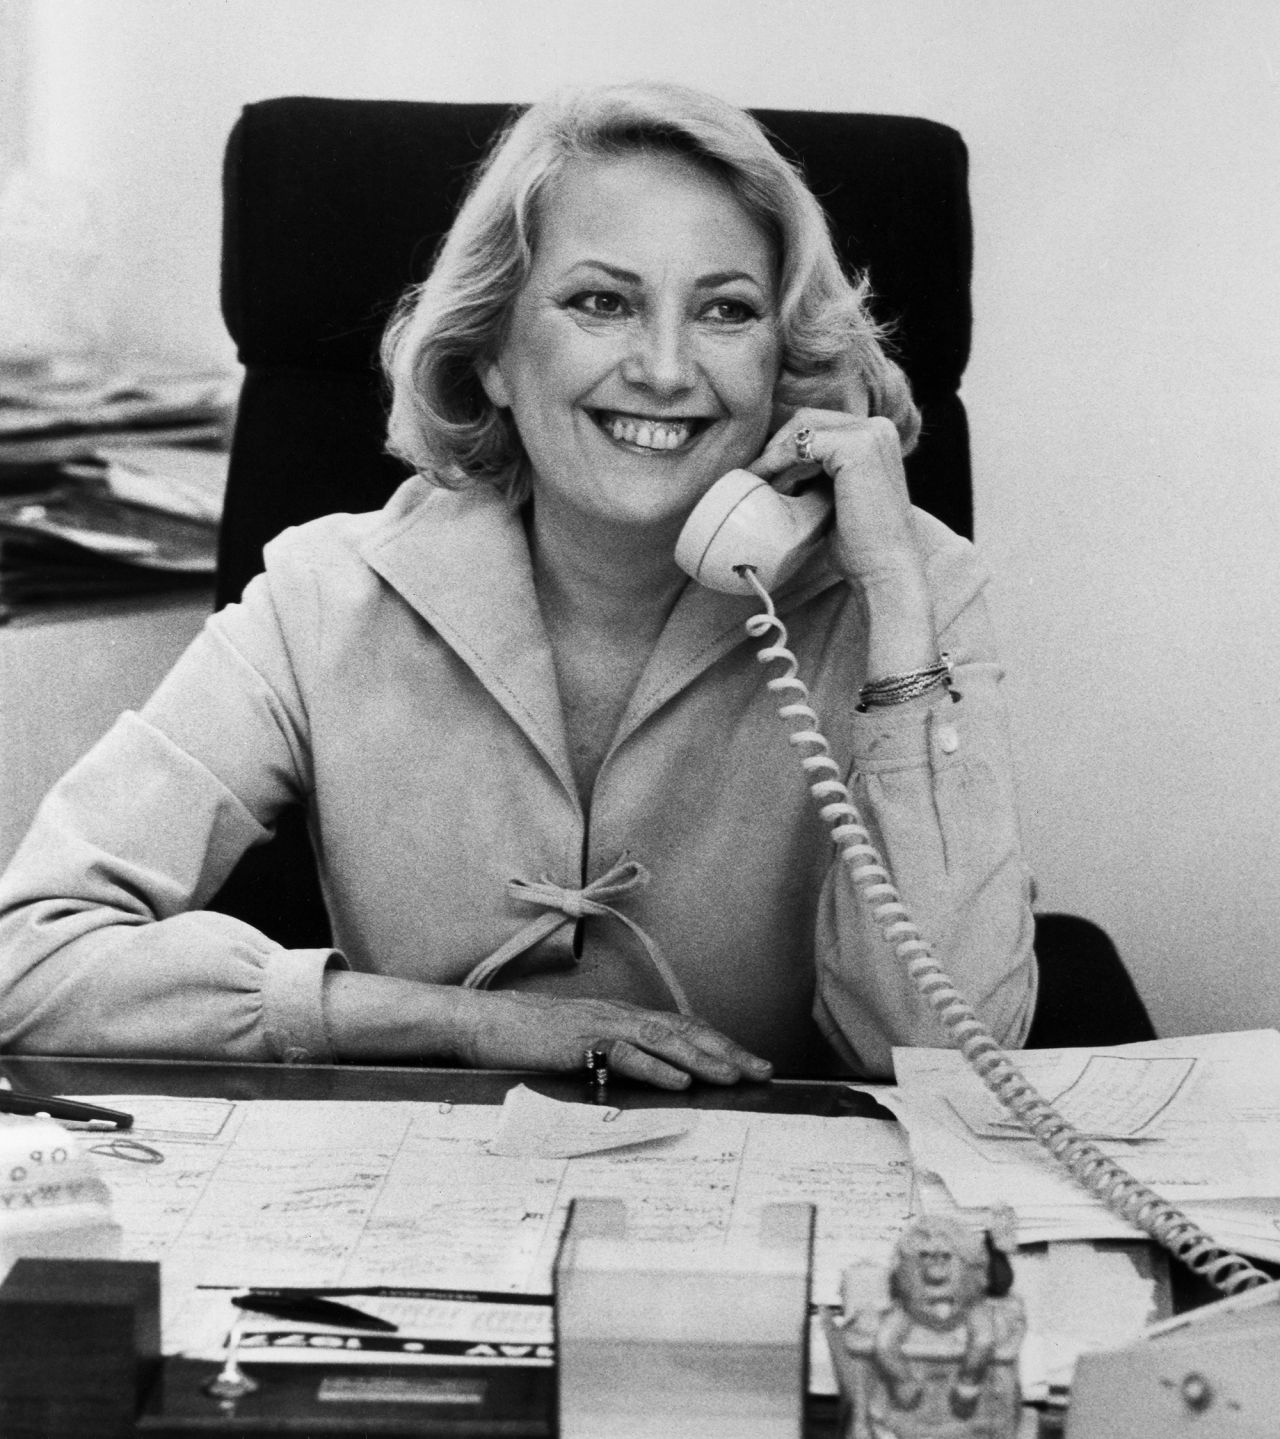 Muriel Siebert, often referred to as the "First Lady of Wall Street," broke gender barriers in the finance world after she bought her own seat on the New York Stock Exchange for nearly half a million dollars. She later became the first woman to serve as superintendent of banking for New York.